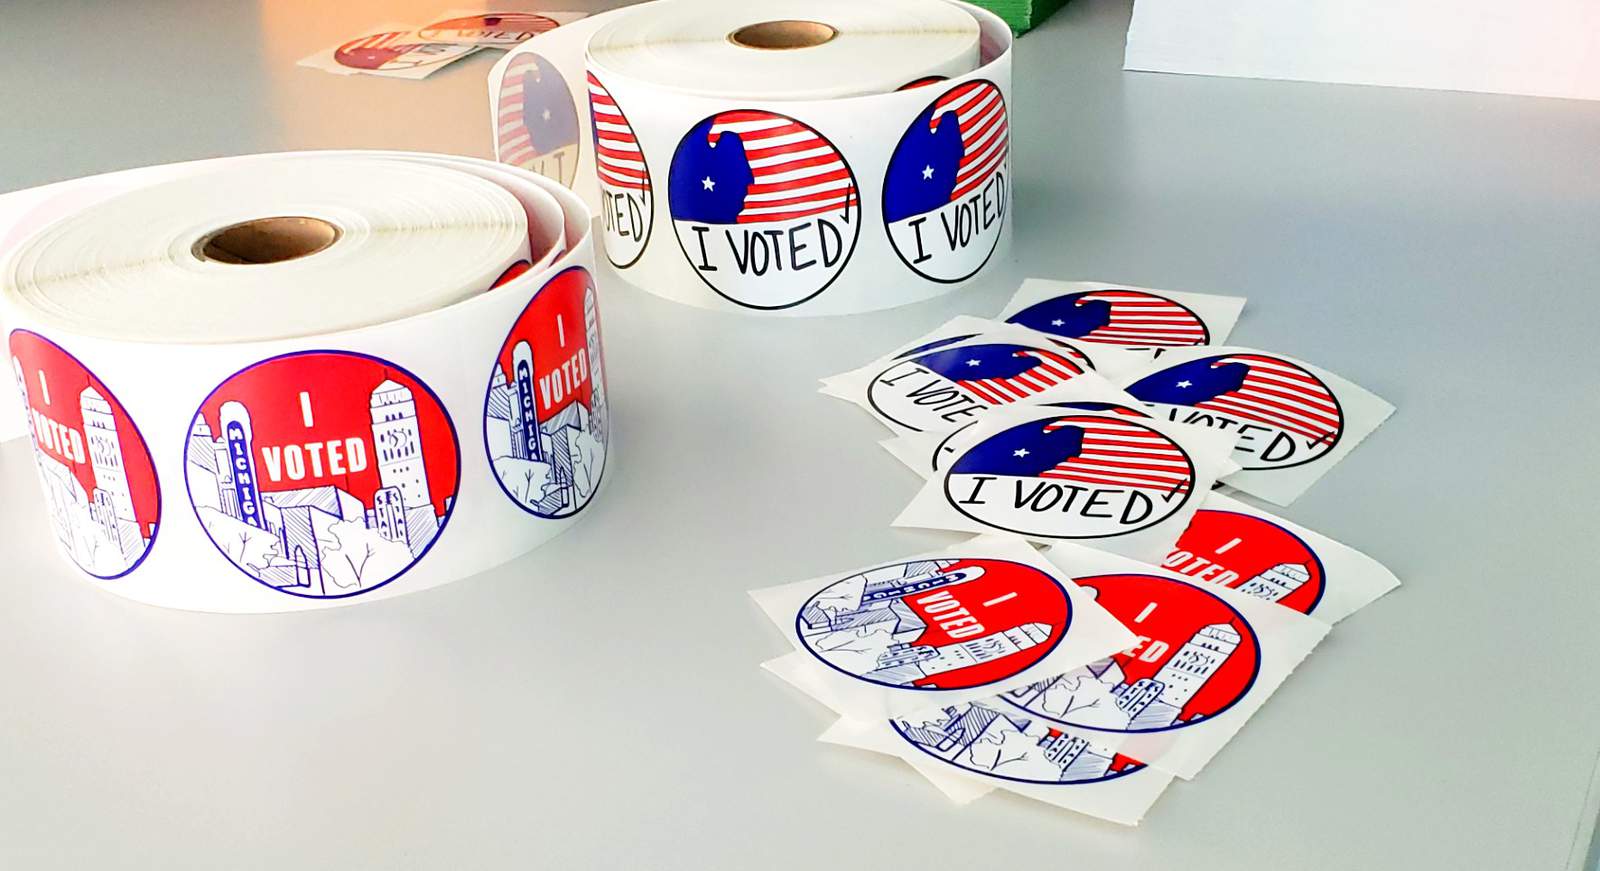 These ‘I voted’ sticker designs are winning in the polls